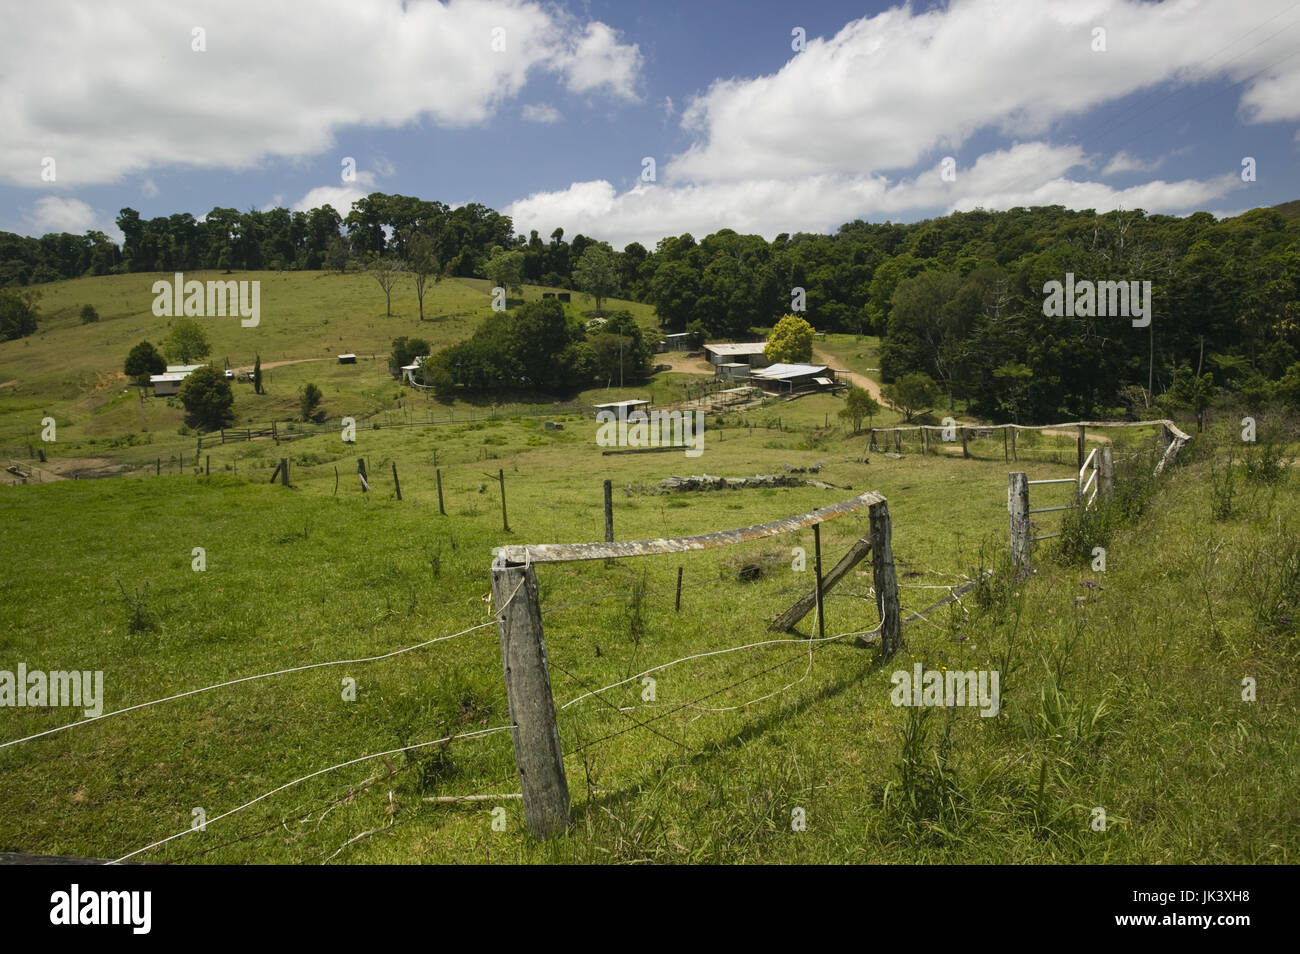 Australia, Queensland, Whitsunday Coast, Pioneer Valley-Eungella, View of Cattle Ranch, Stock Photo